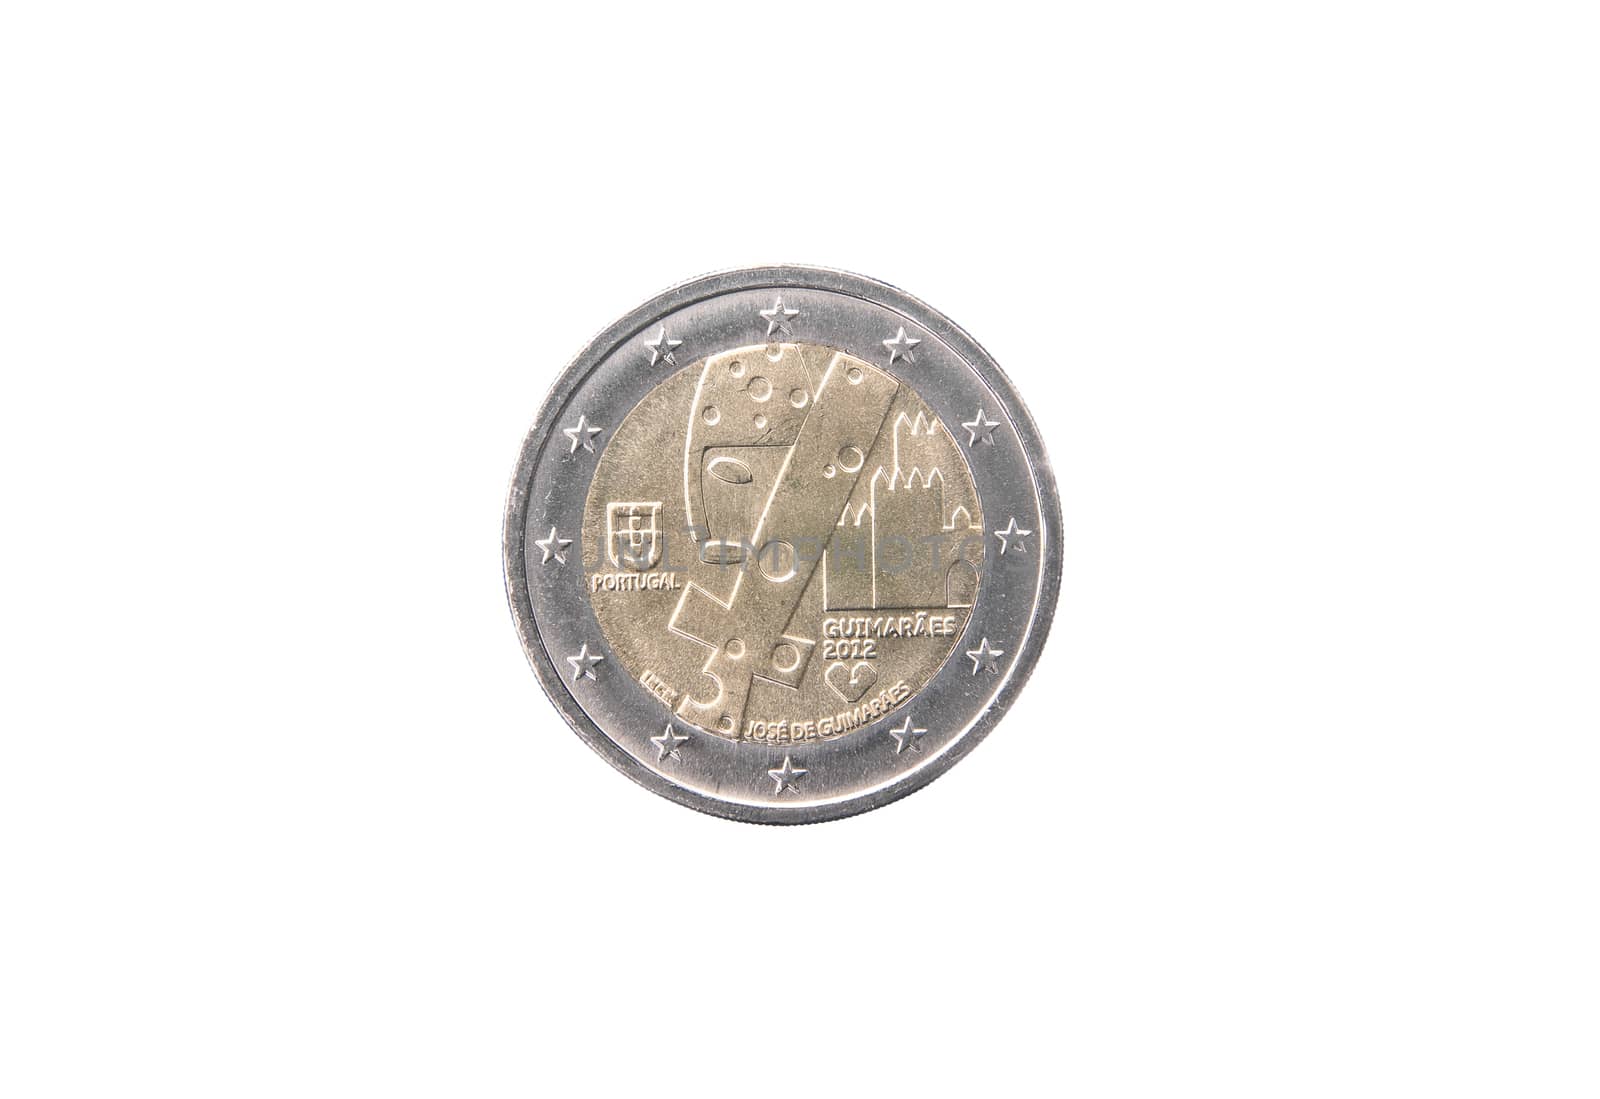 Commemorative coin of Portugal minted in 2012 isolated on white